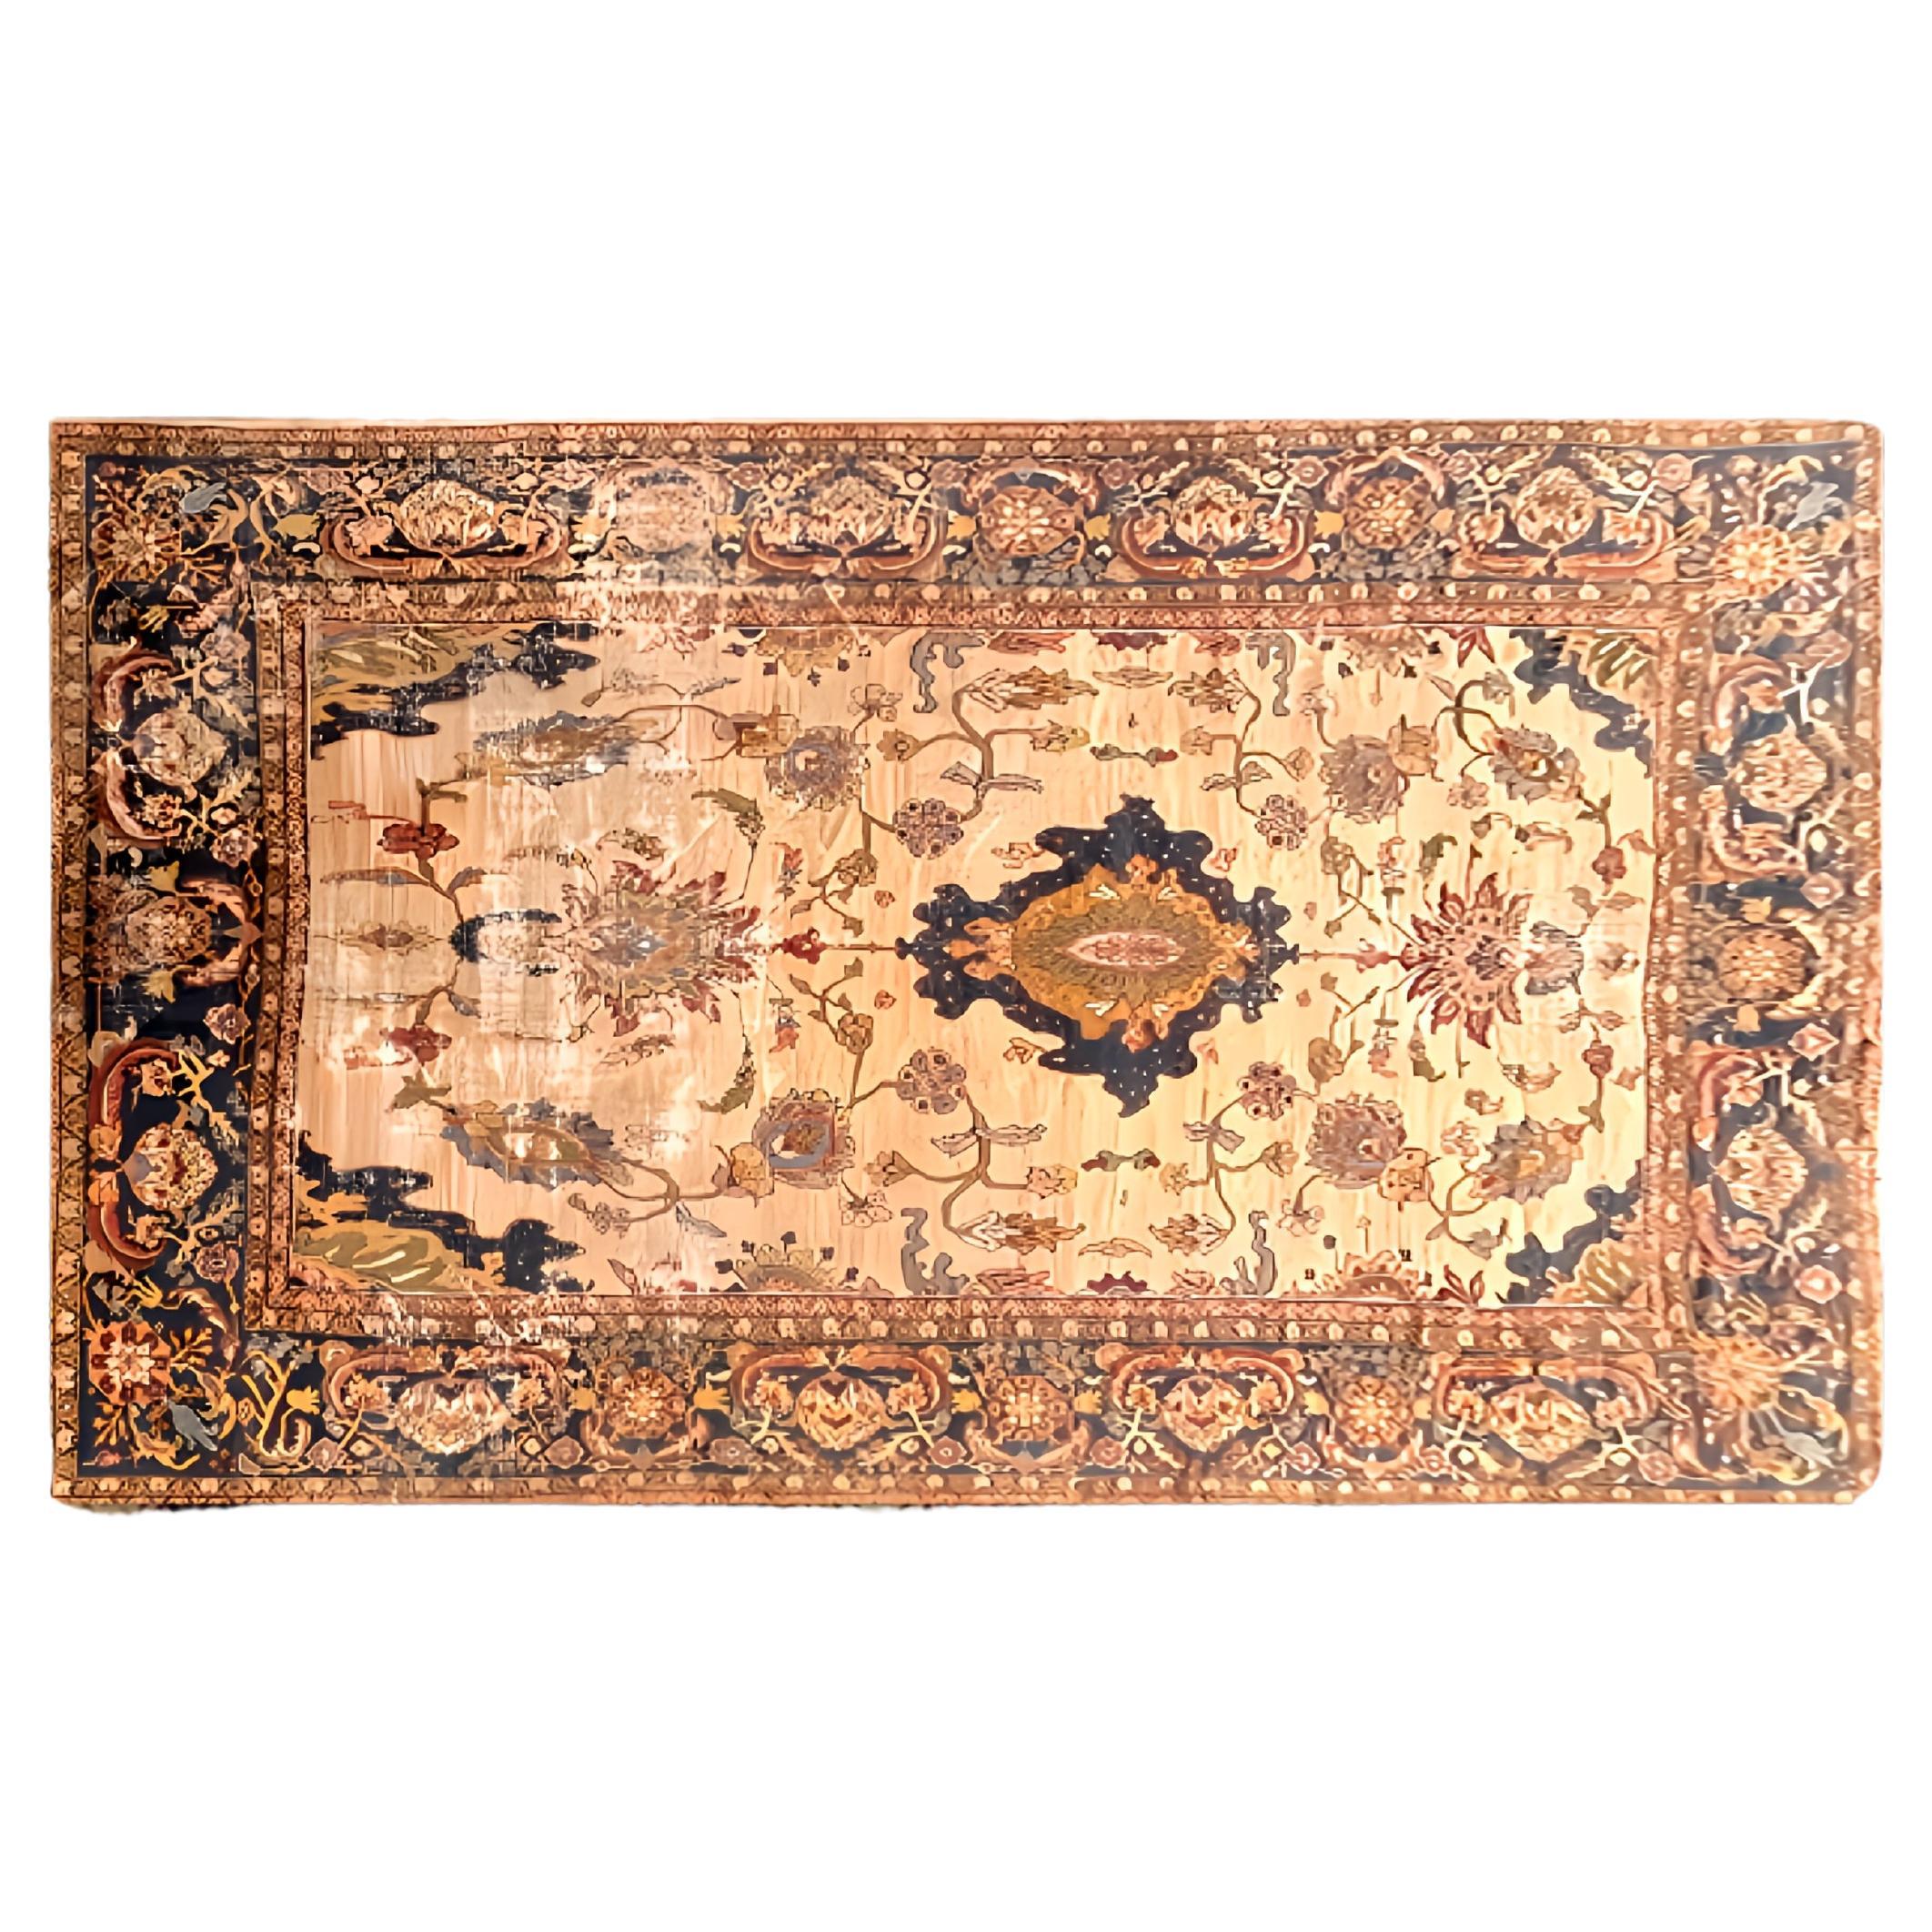 Antique Carpet Mahal Sultanabad Collection